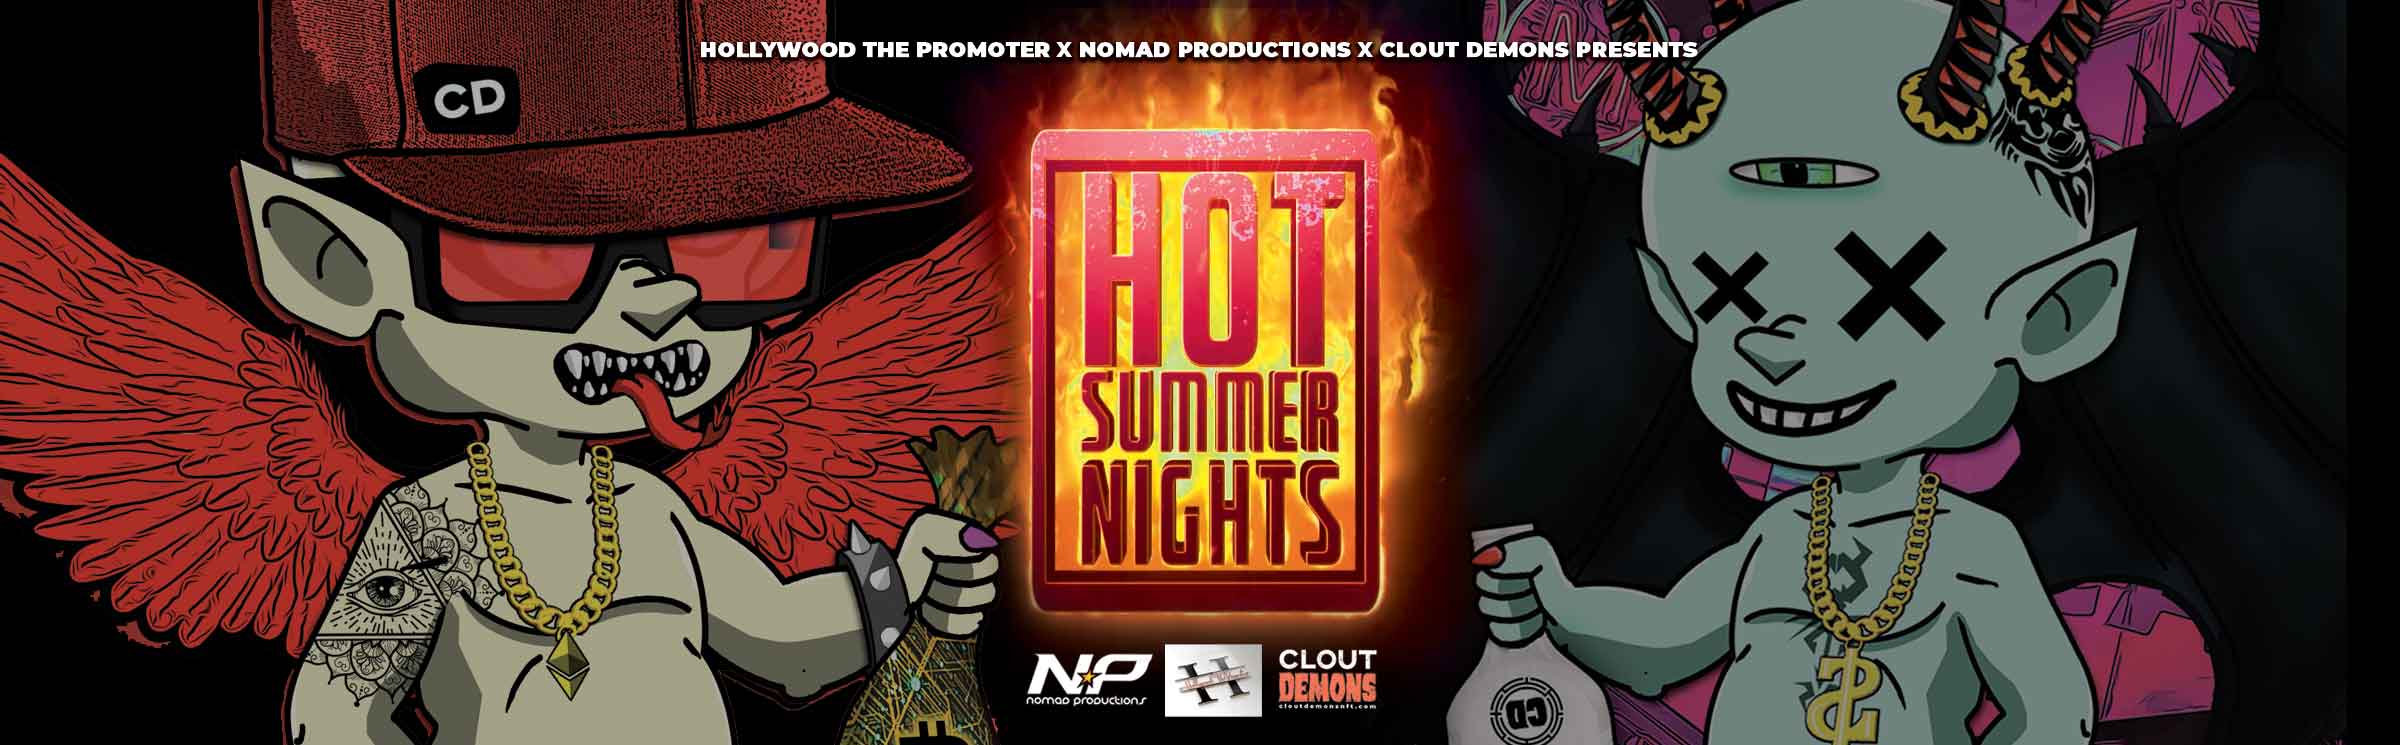 Clout Demons x Hollywood the Promoter x Myrtle Maniac Hot Summer Nights at House of BLues